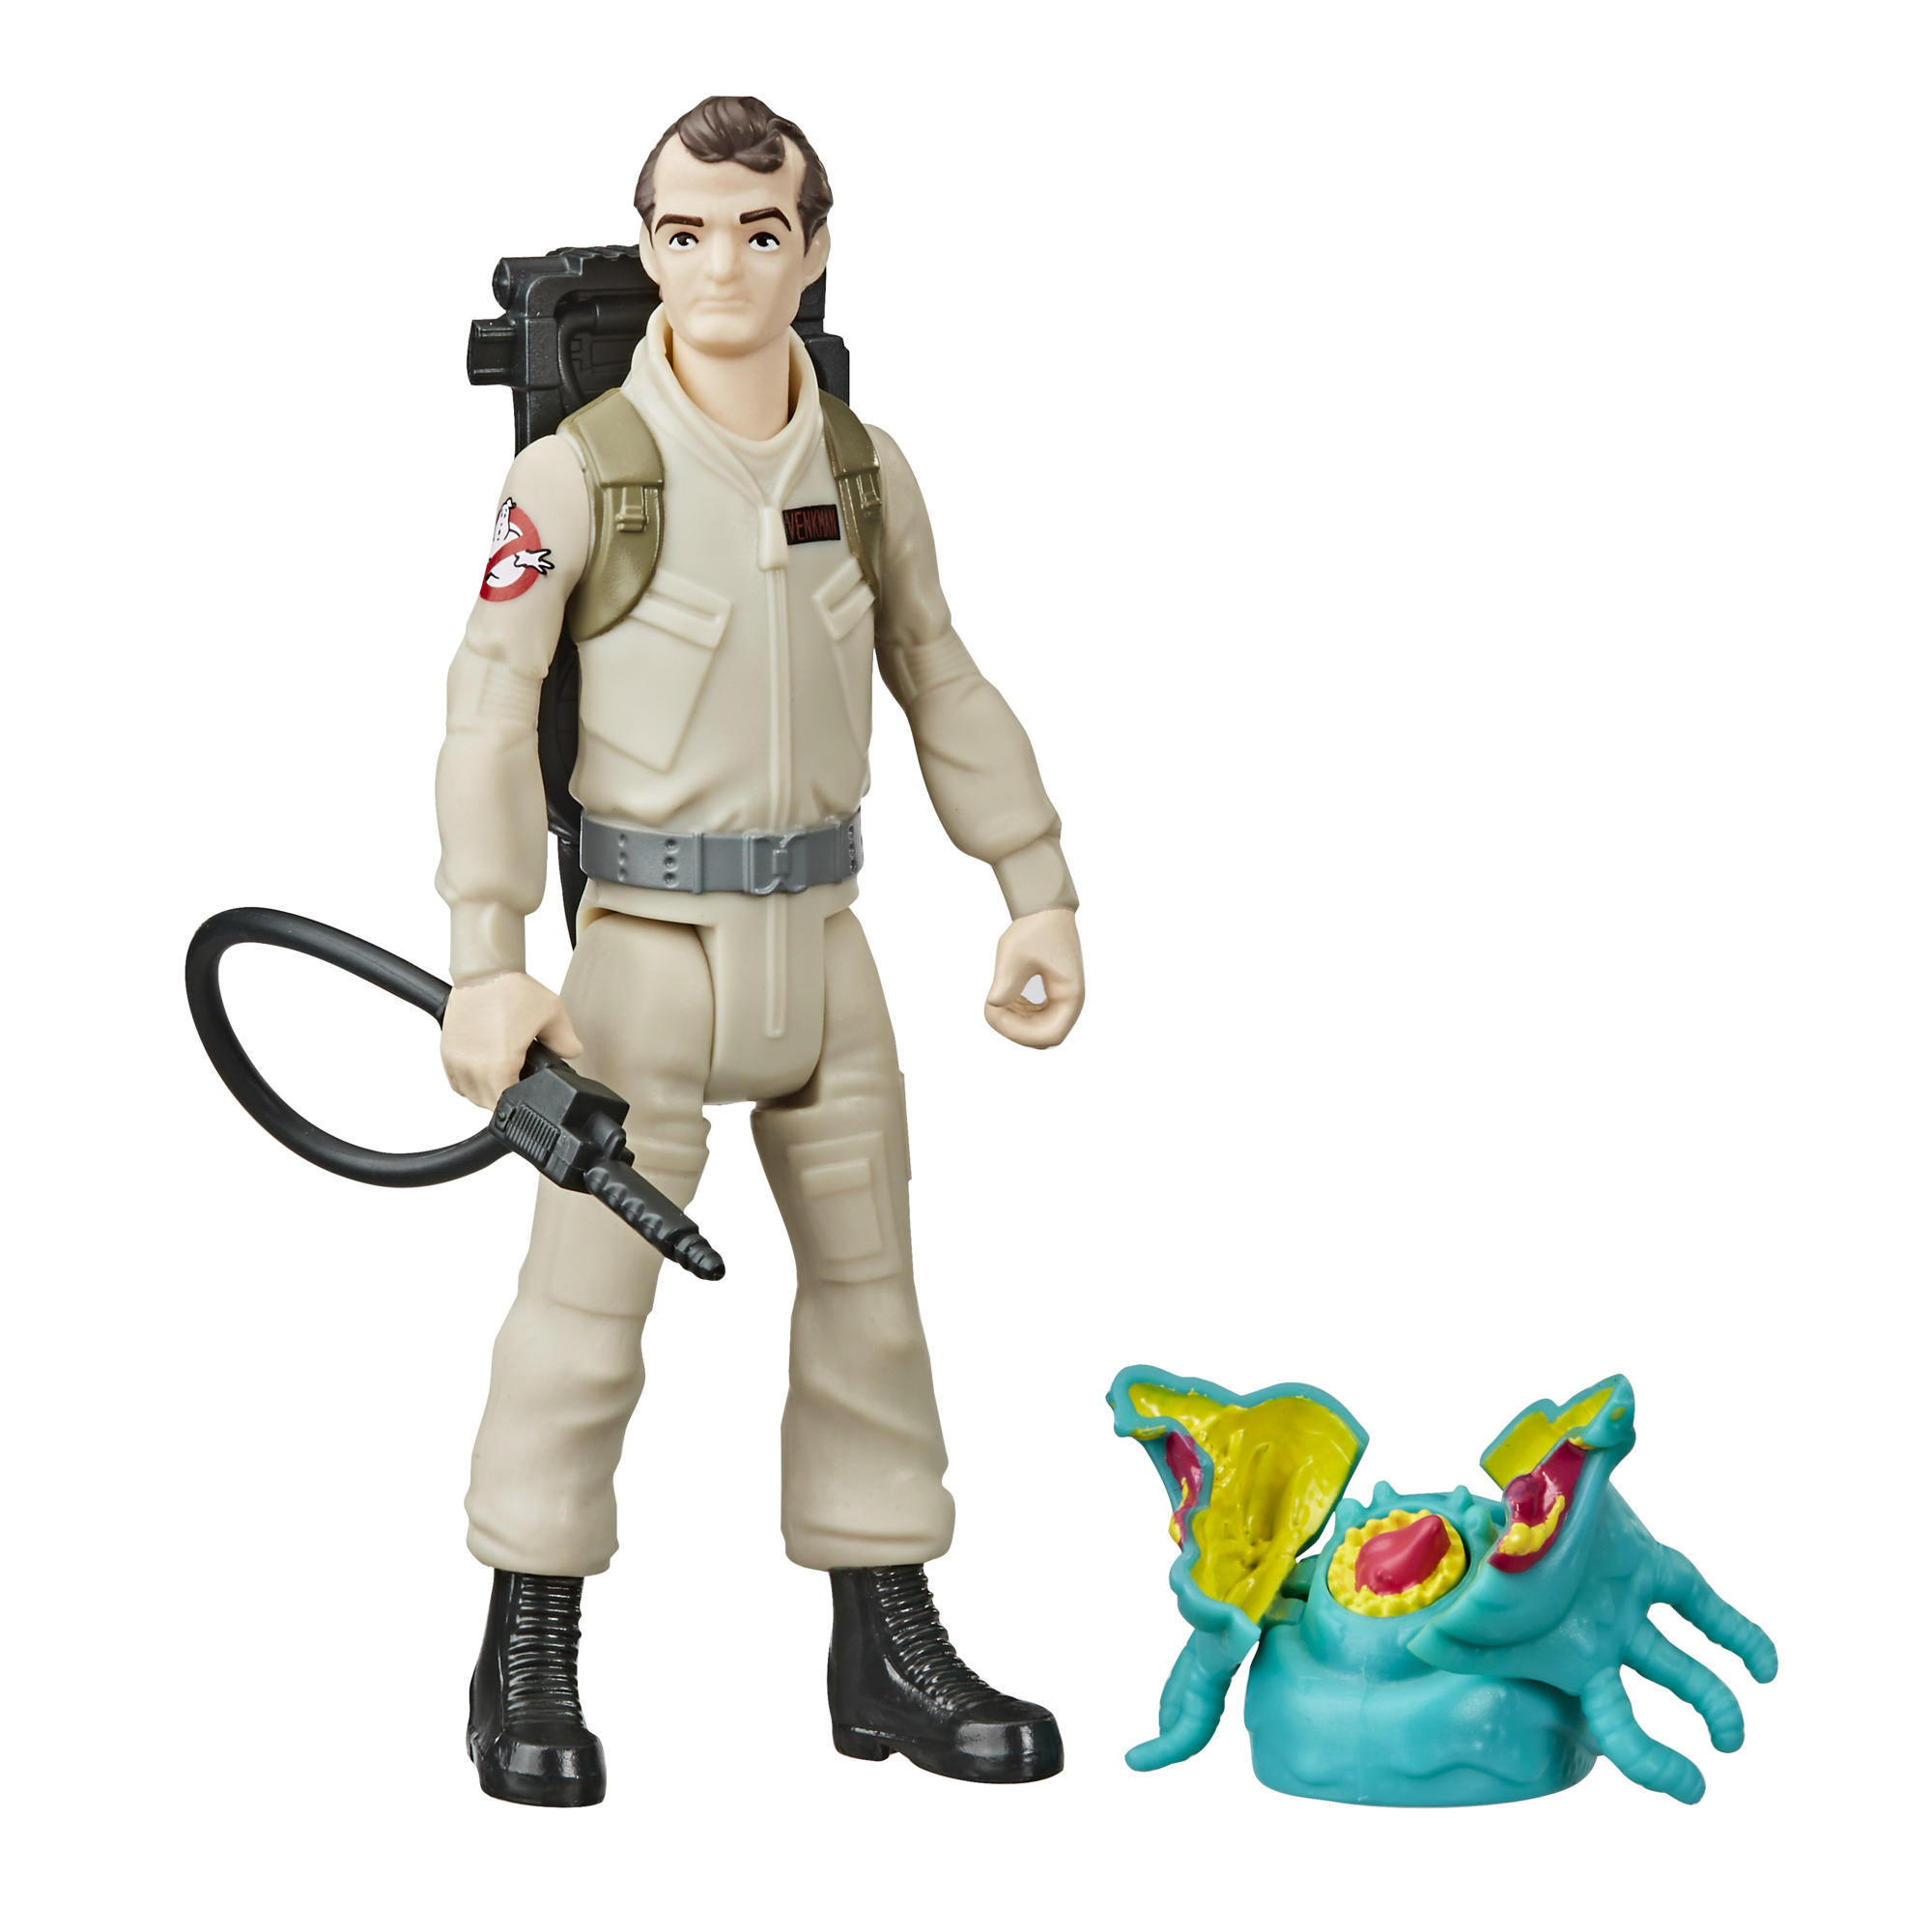 Ghostbusters Fright Features Peter Venkman Figure with Interactive Ghost Figure and Accessory for Kids Ages 4 and Up